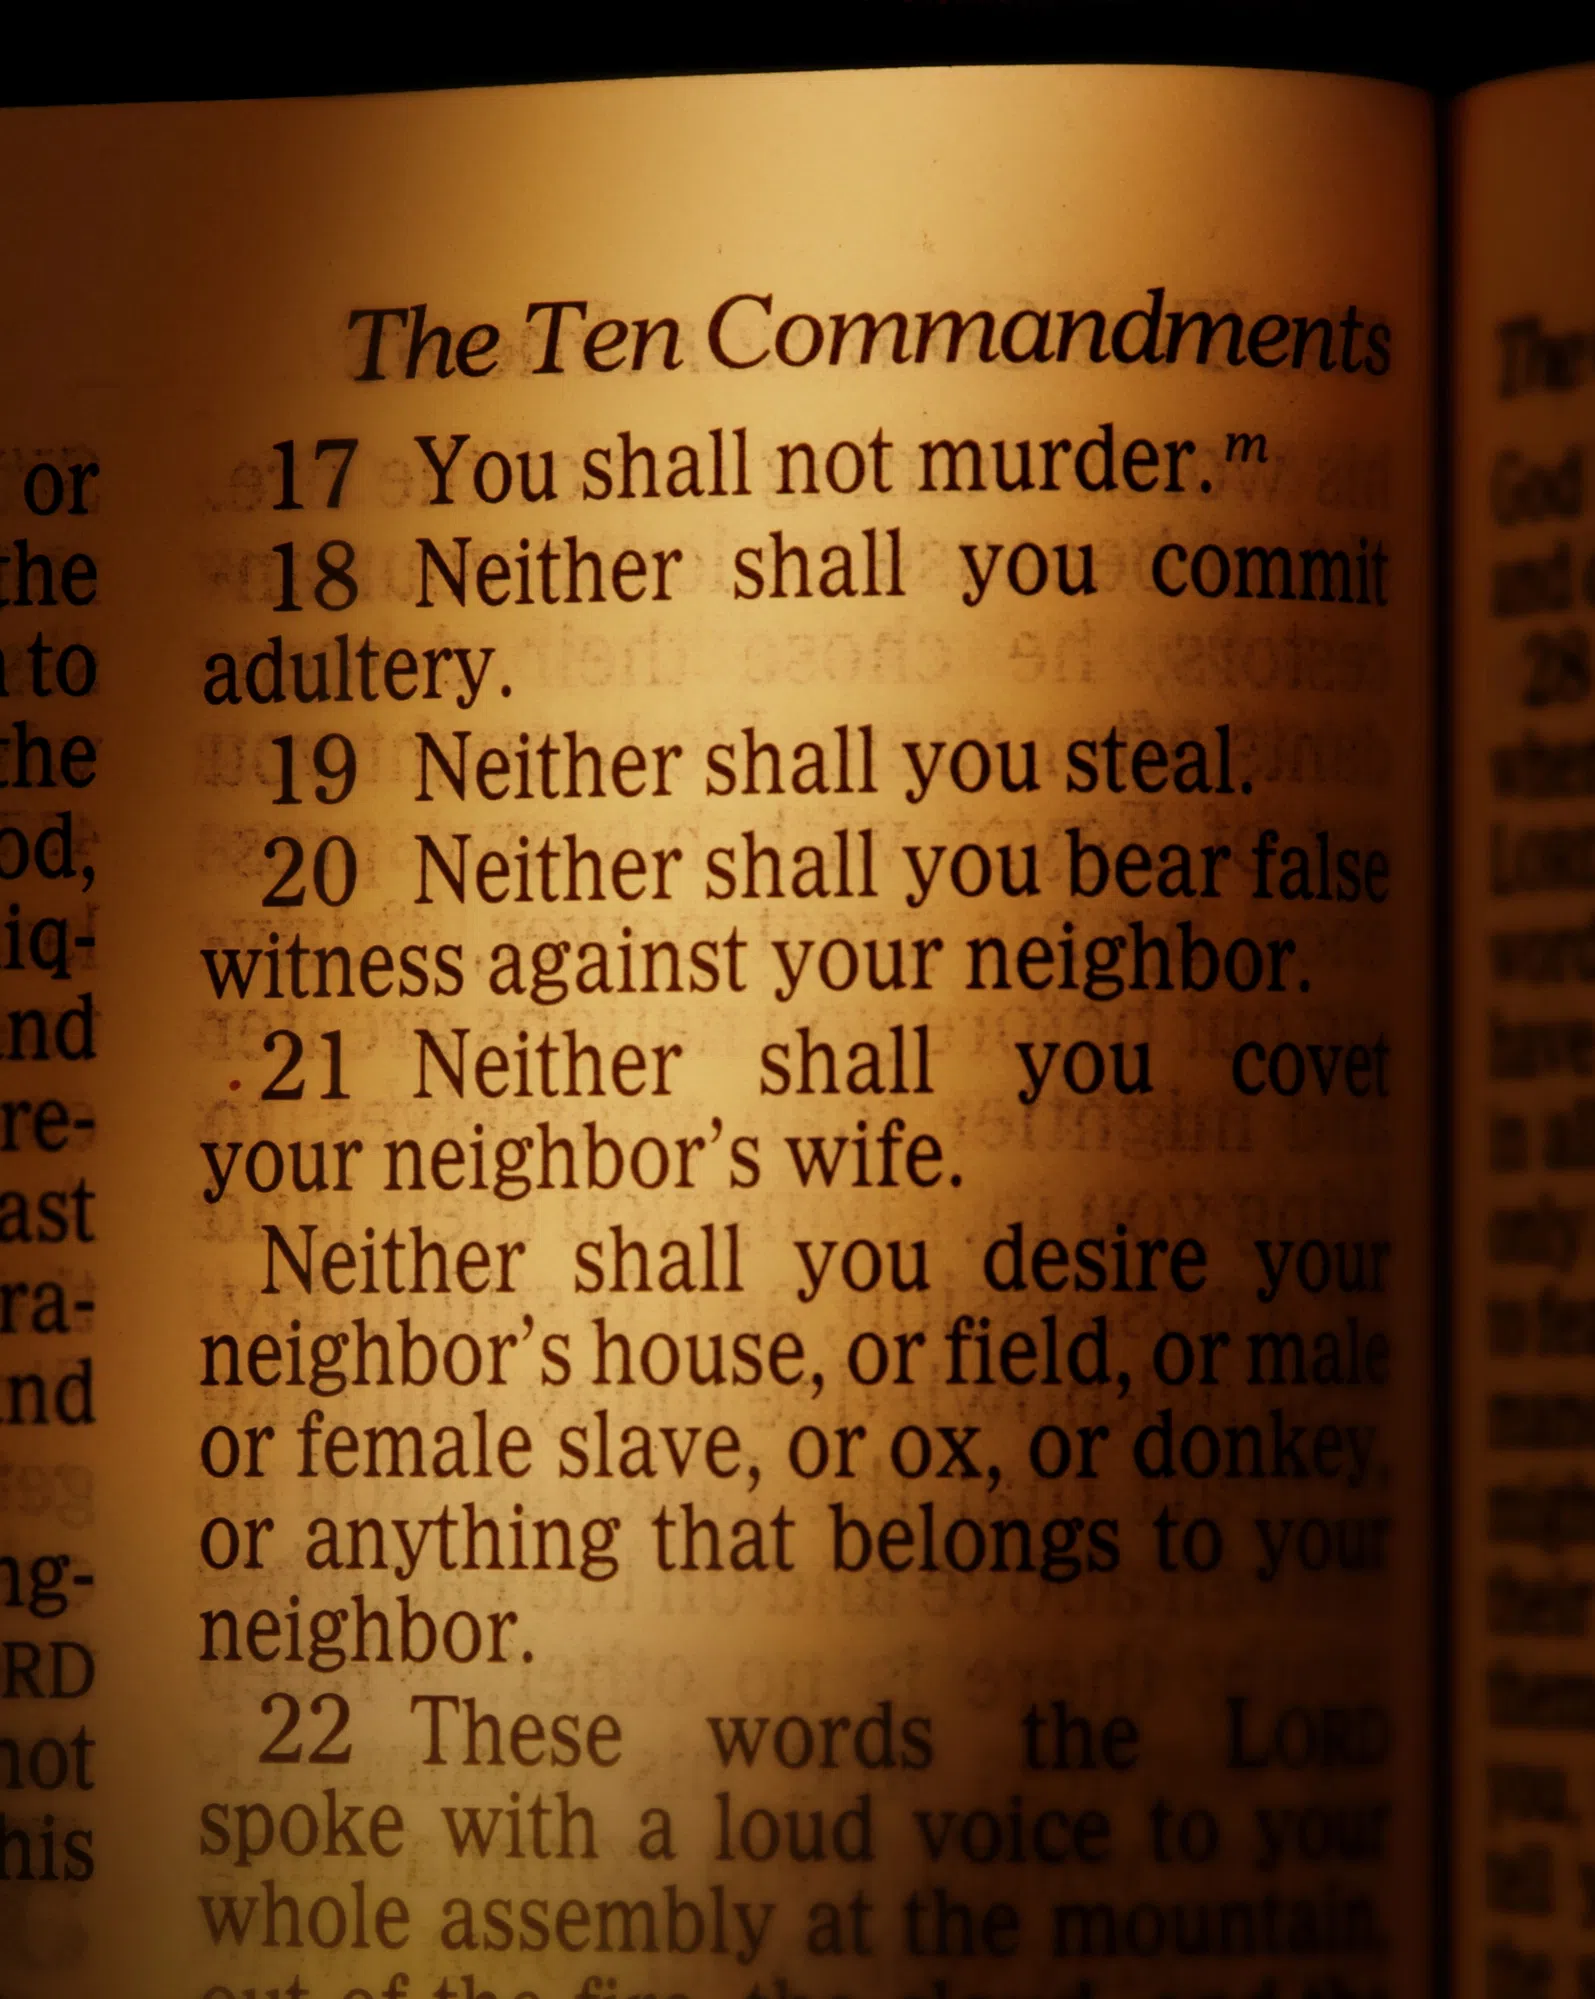 Full House approves legislation that would allow the Ten Commandments to be displayed in public classrooms